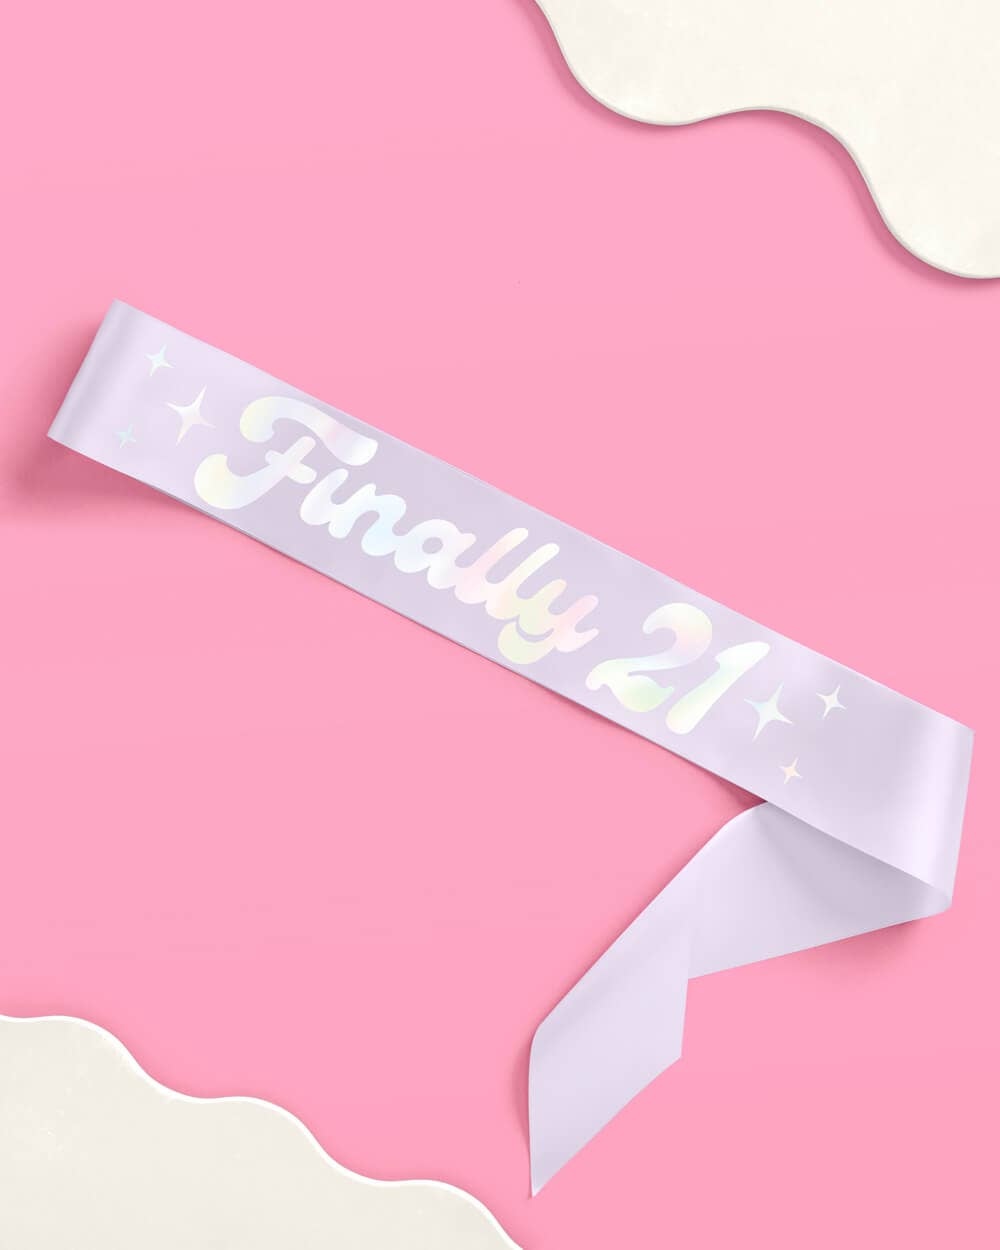 21st Birthday Party Sash, Finally Legal, Party Accessory - PaperGeenius